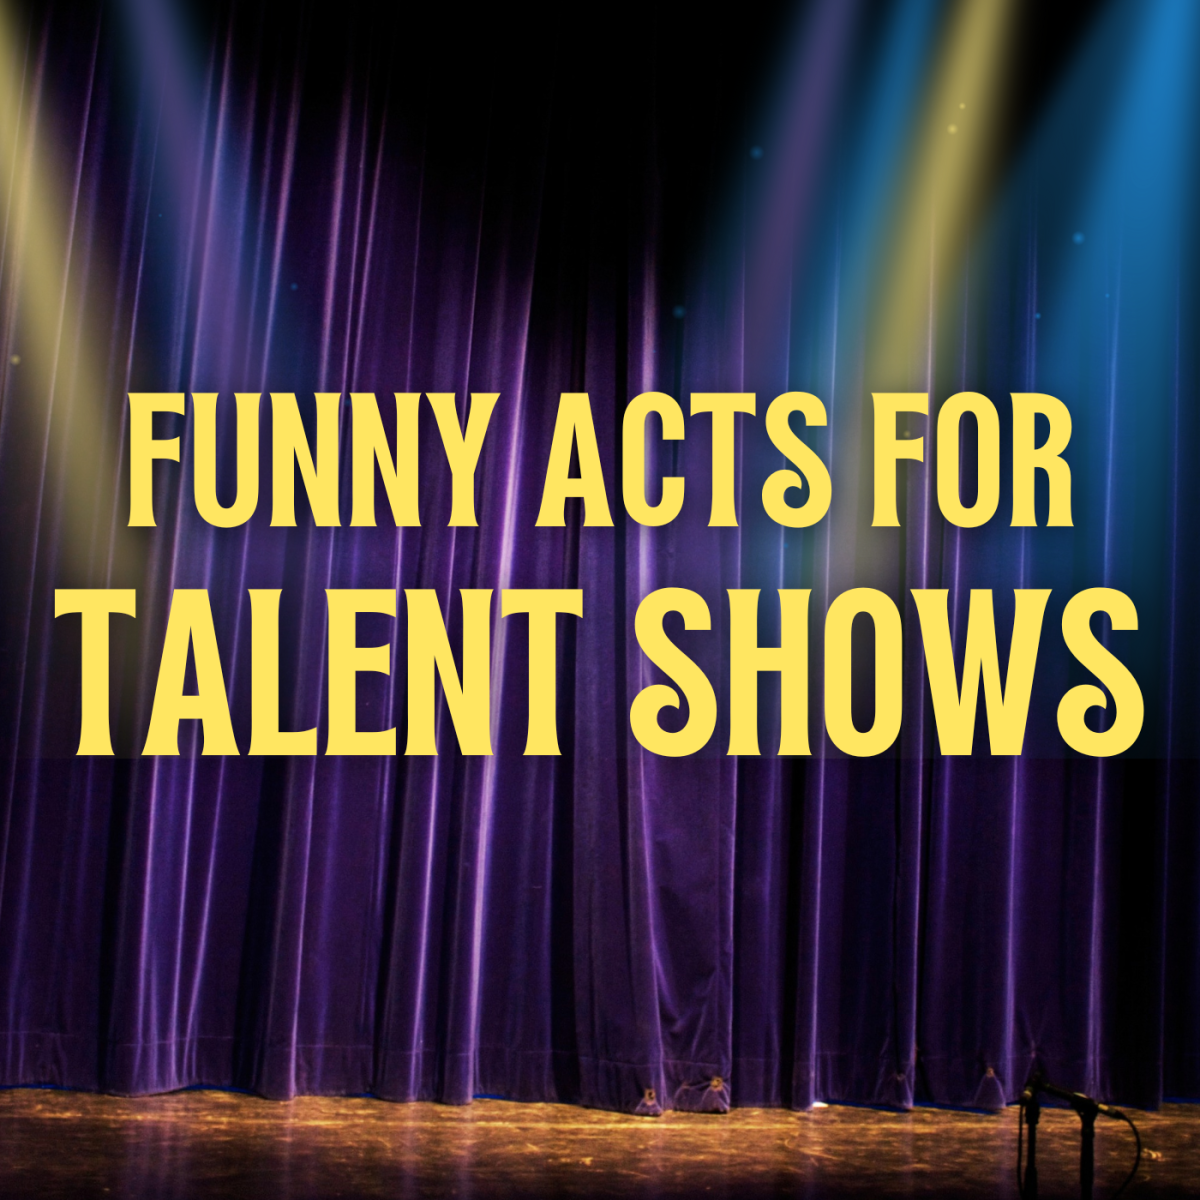 Got a talent show coming up and need an idea for a performance? Look no further than these funny and oh-so-easy ideas!